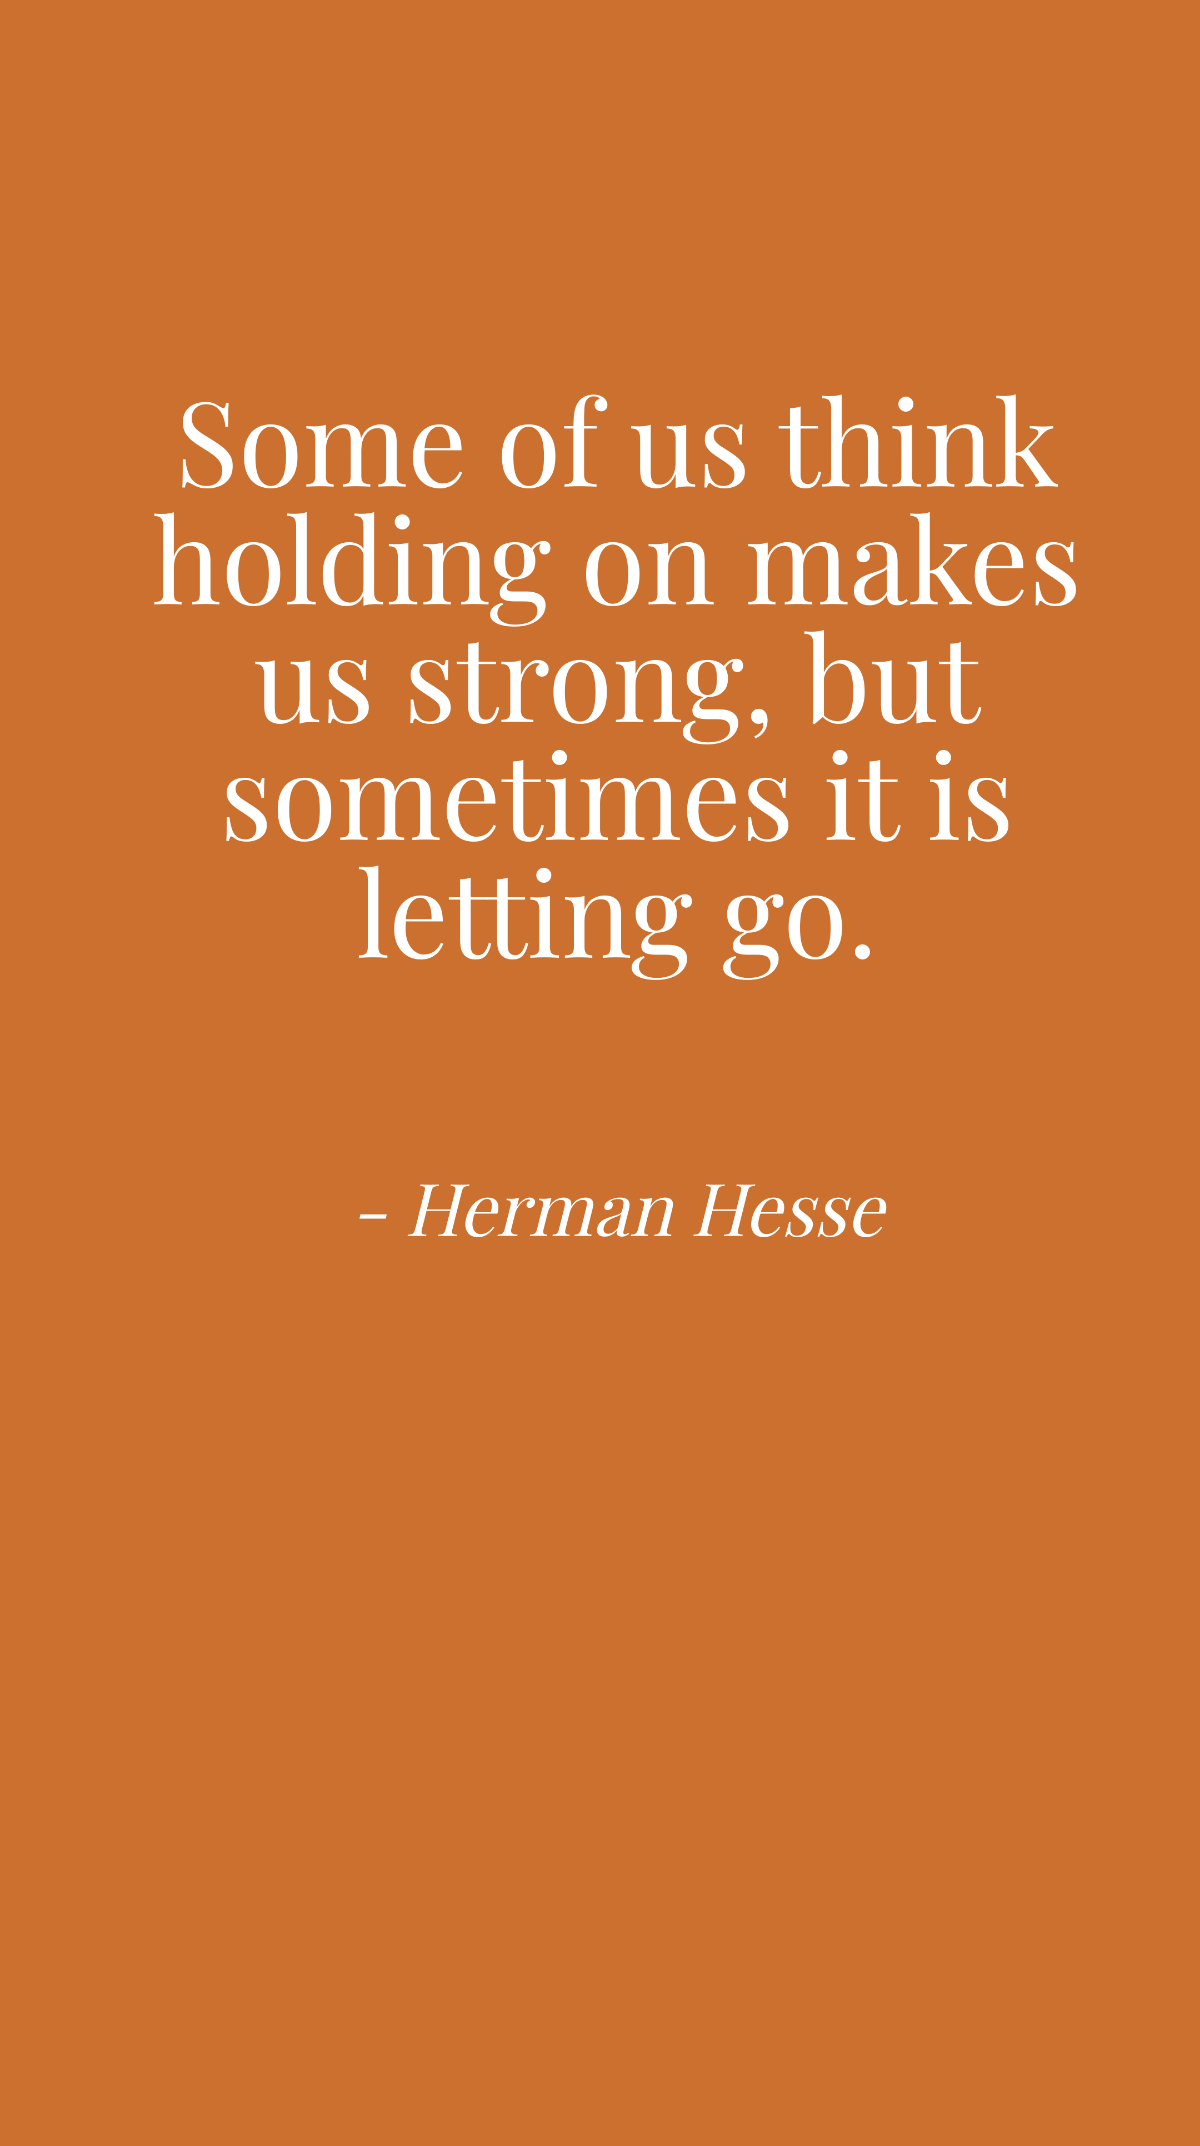 Herman Hesse - Some of us think holding on makes us strong, but sometimes it is letting go. Template